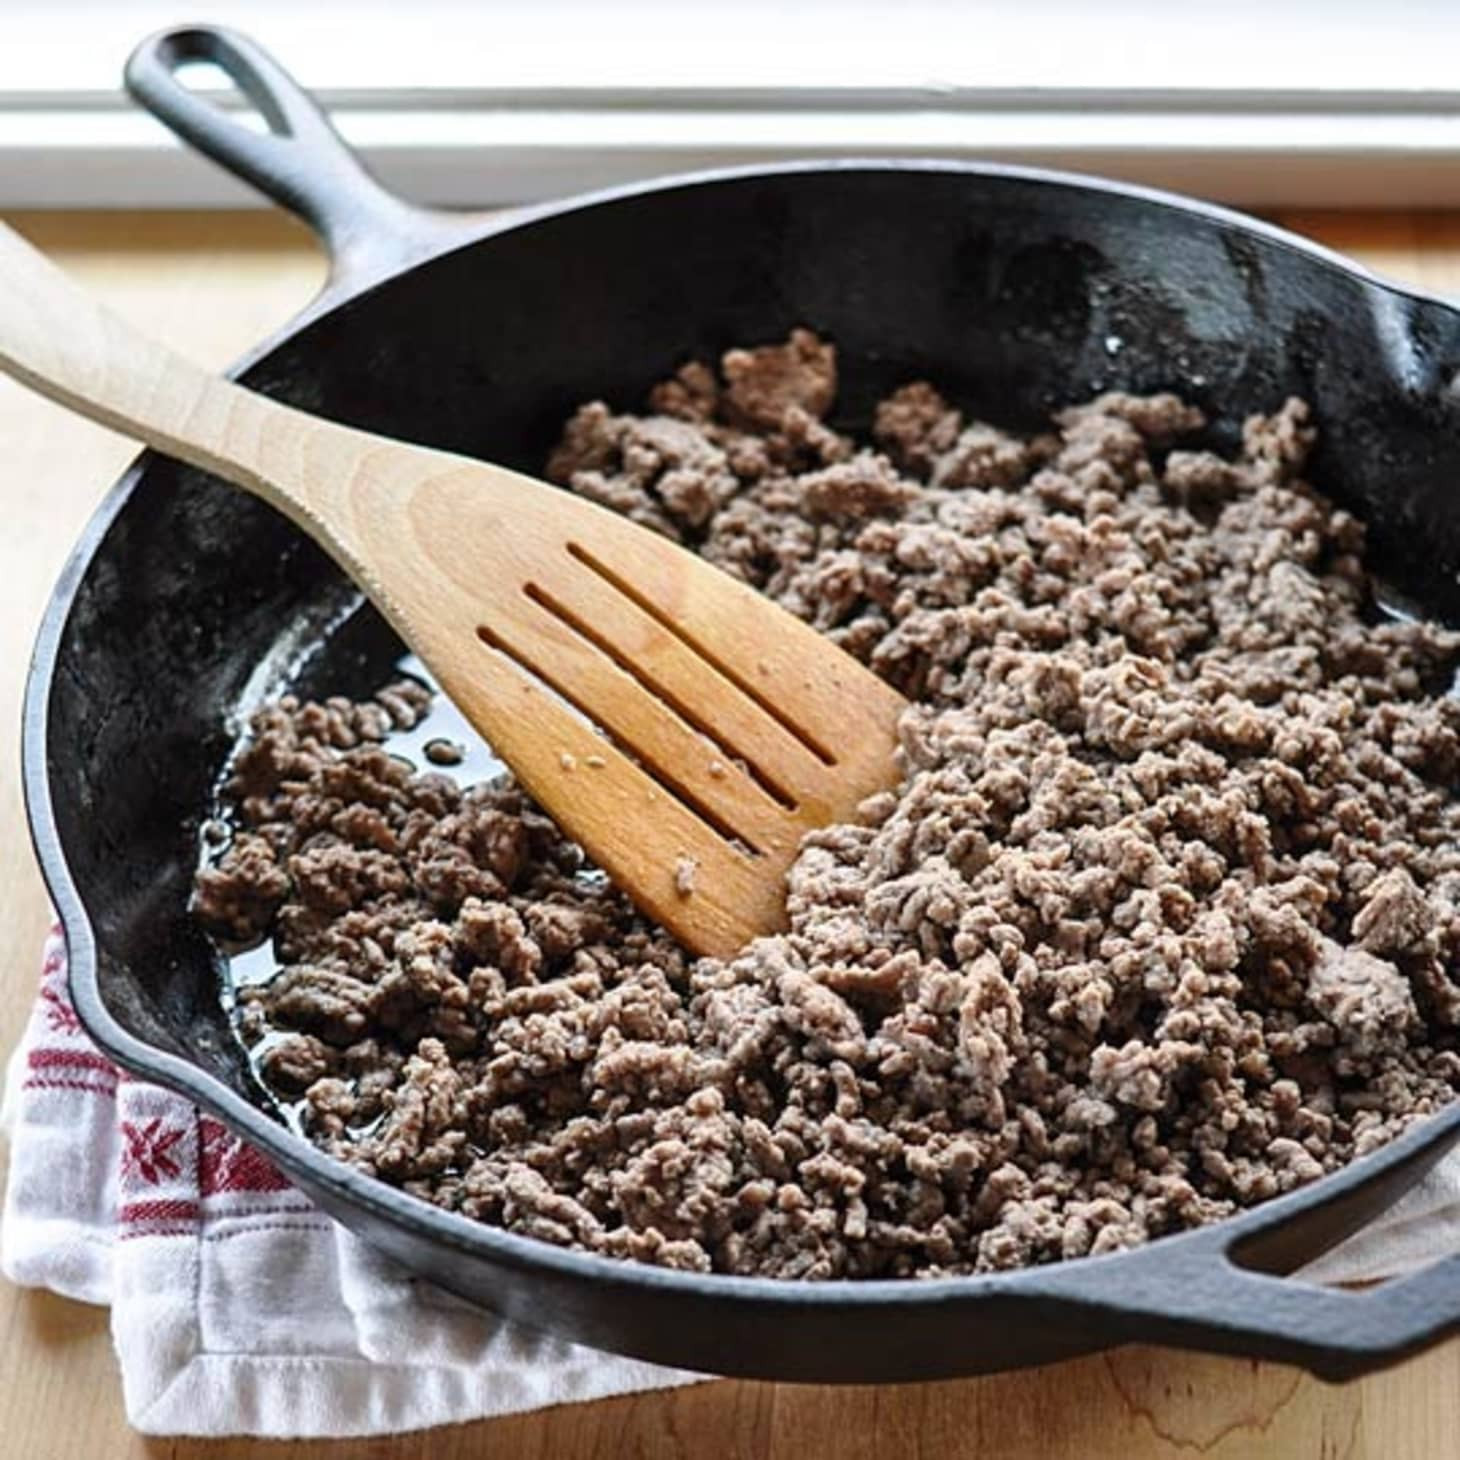 Fried Ground Beef
 Everything You Need to Know About Ground Beef